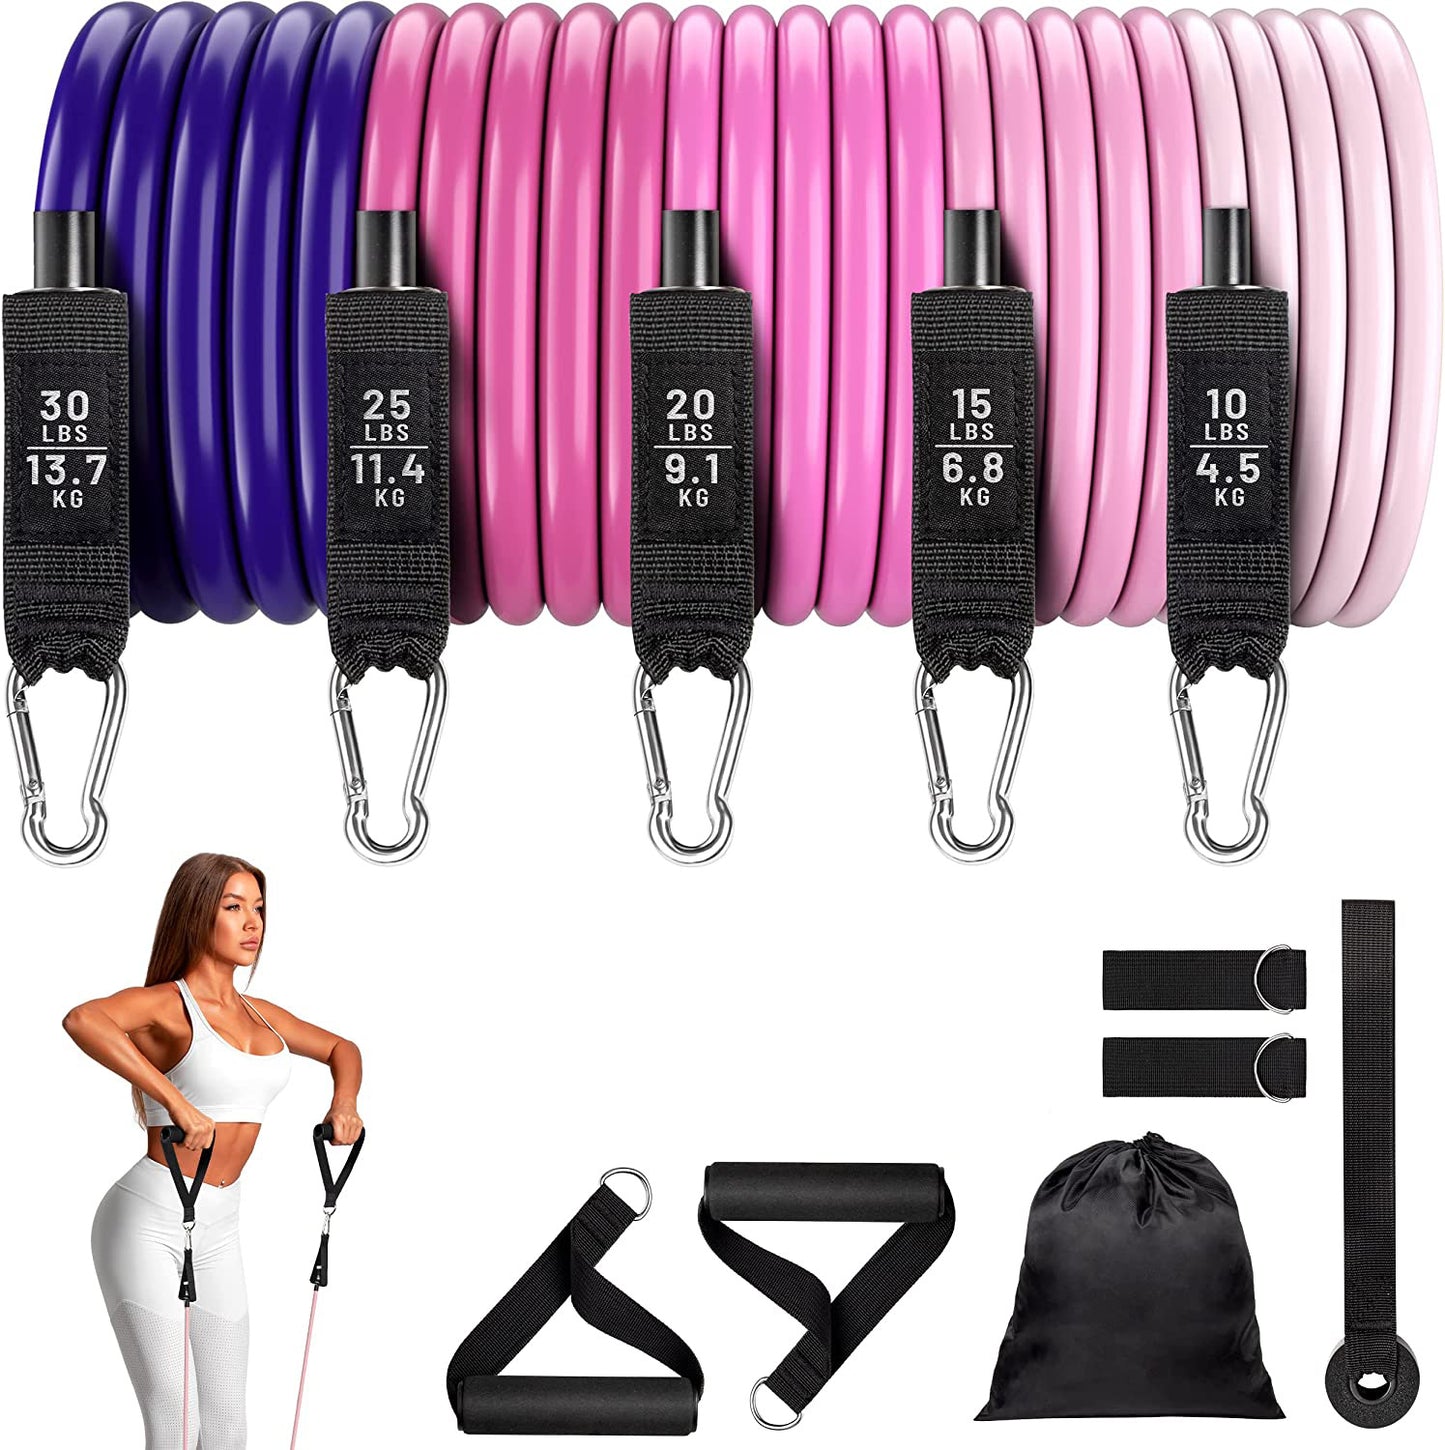 Resistance Bands, Exercise Bands, Workout Bands, Resistance Bands for Working Out with Handles for Men and Women, Exercising Bands for Strength Training Equipment at Home